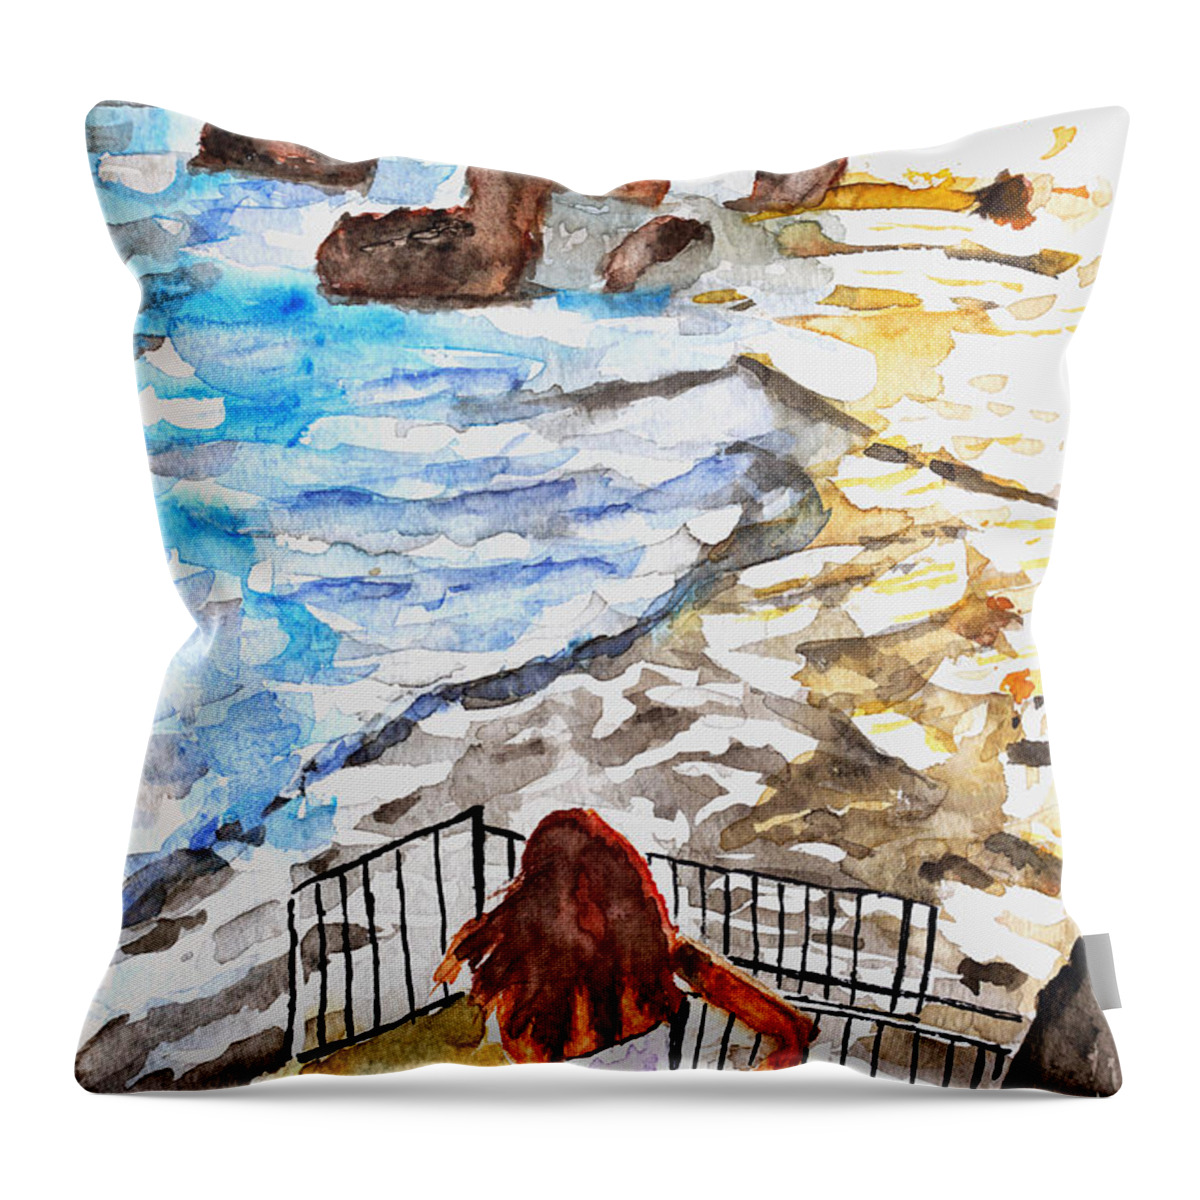 Beach Time Throw Pillow featuring the painting Beach Time by Ruben Carrillo